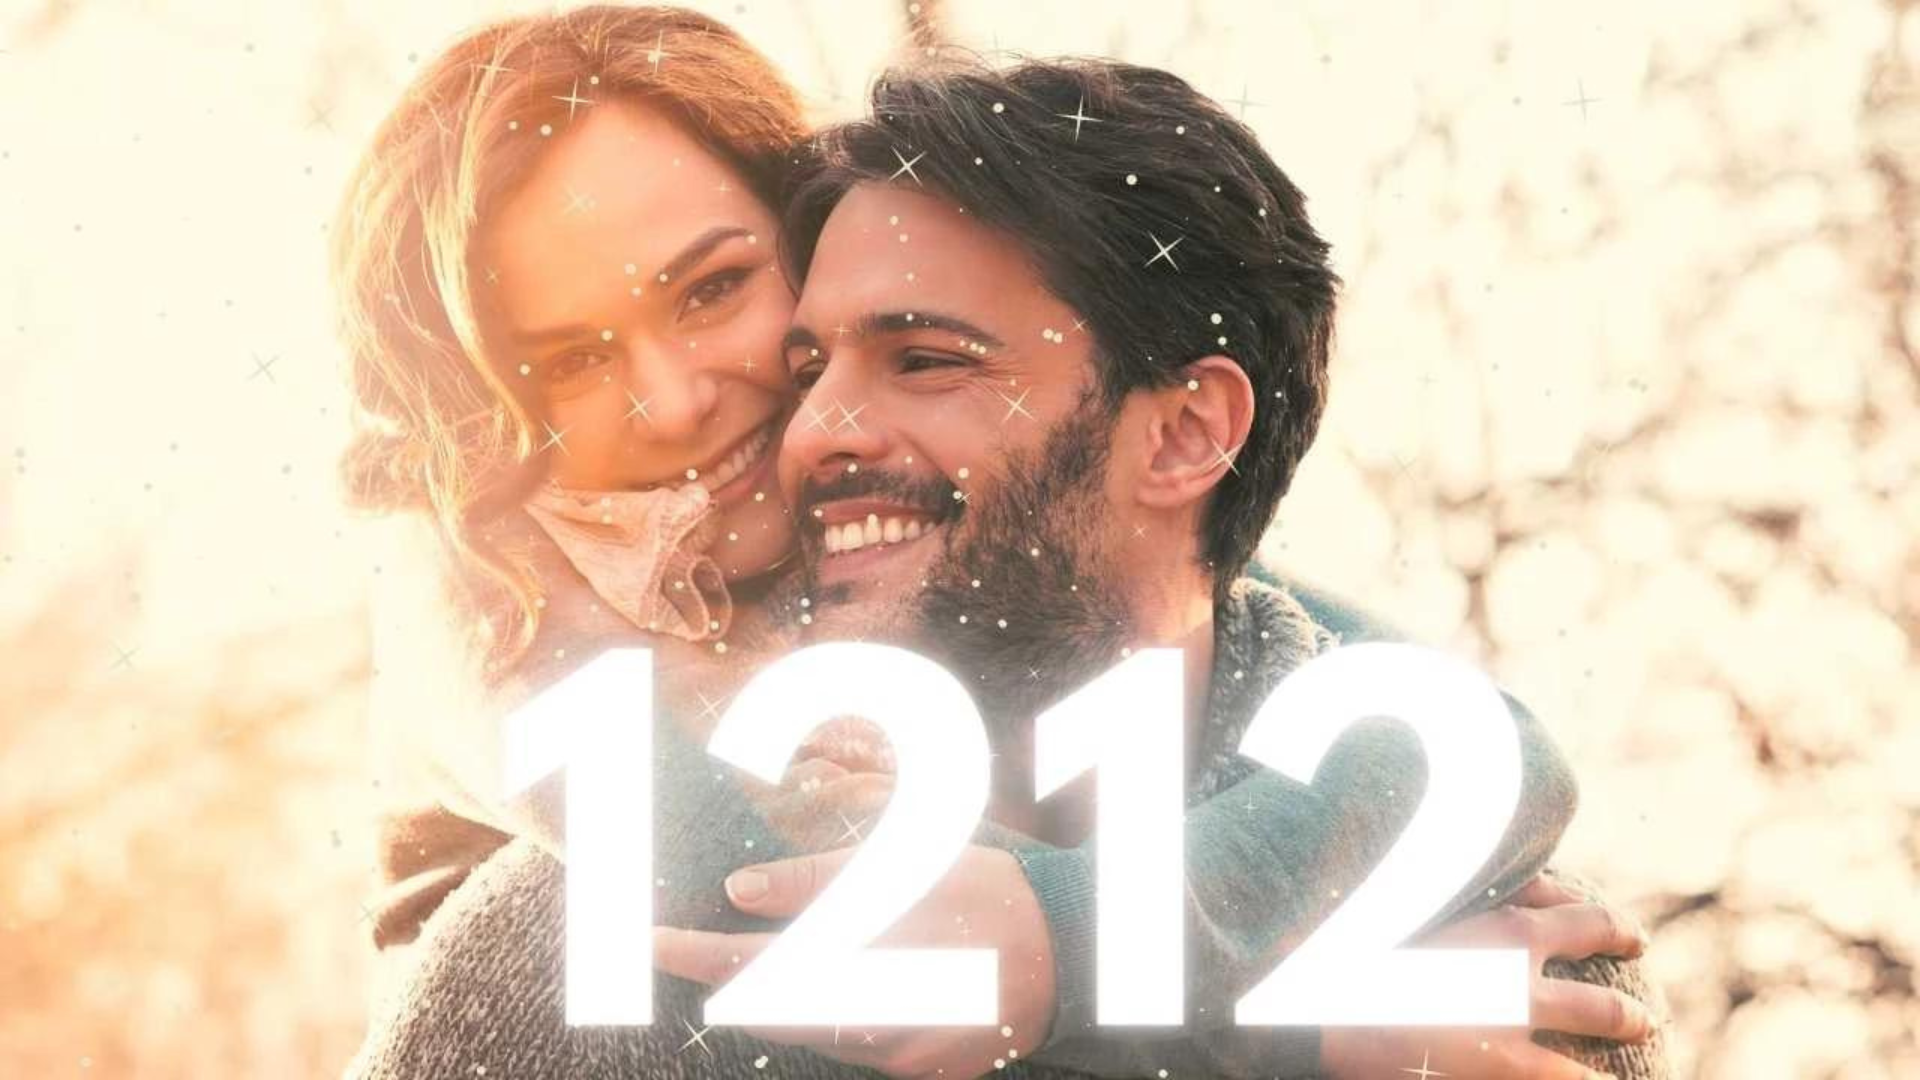 A woman hugging a man from his back with number 1212